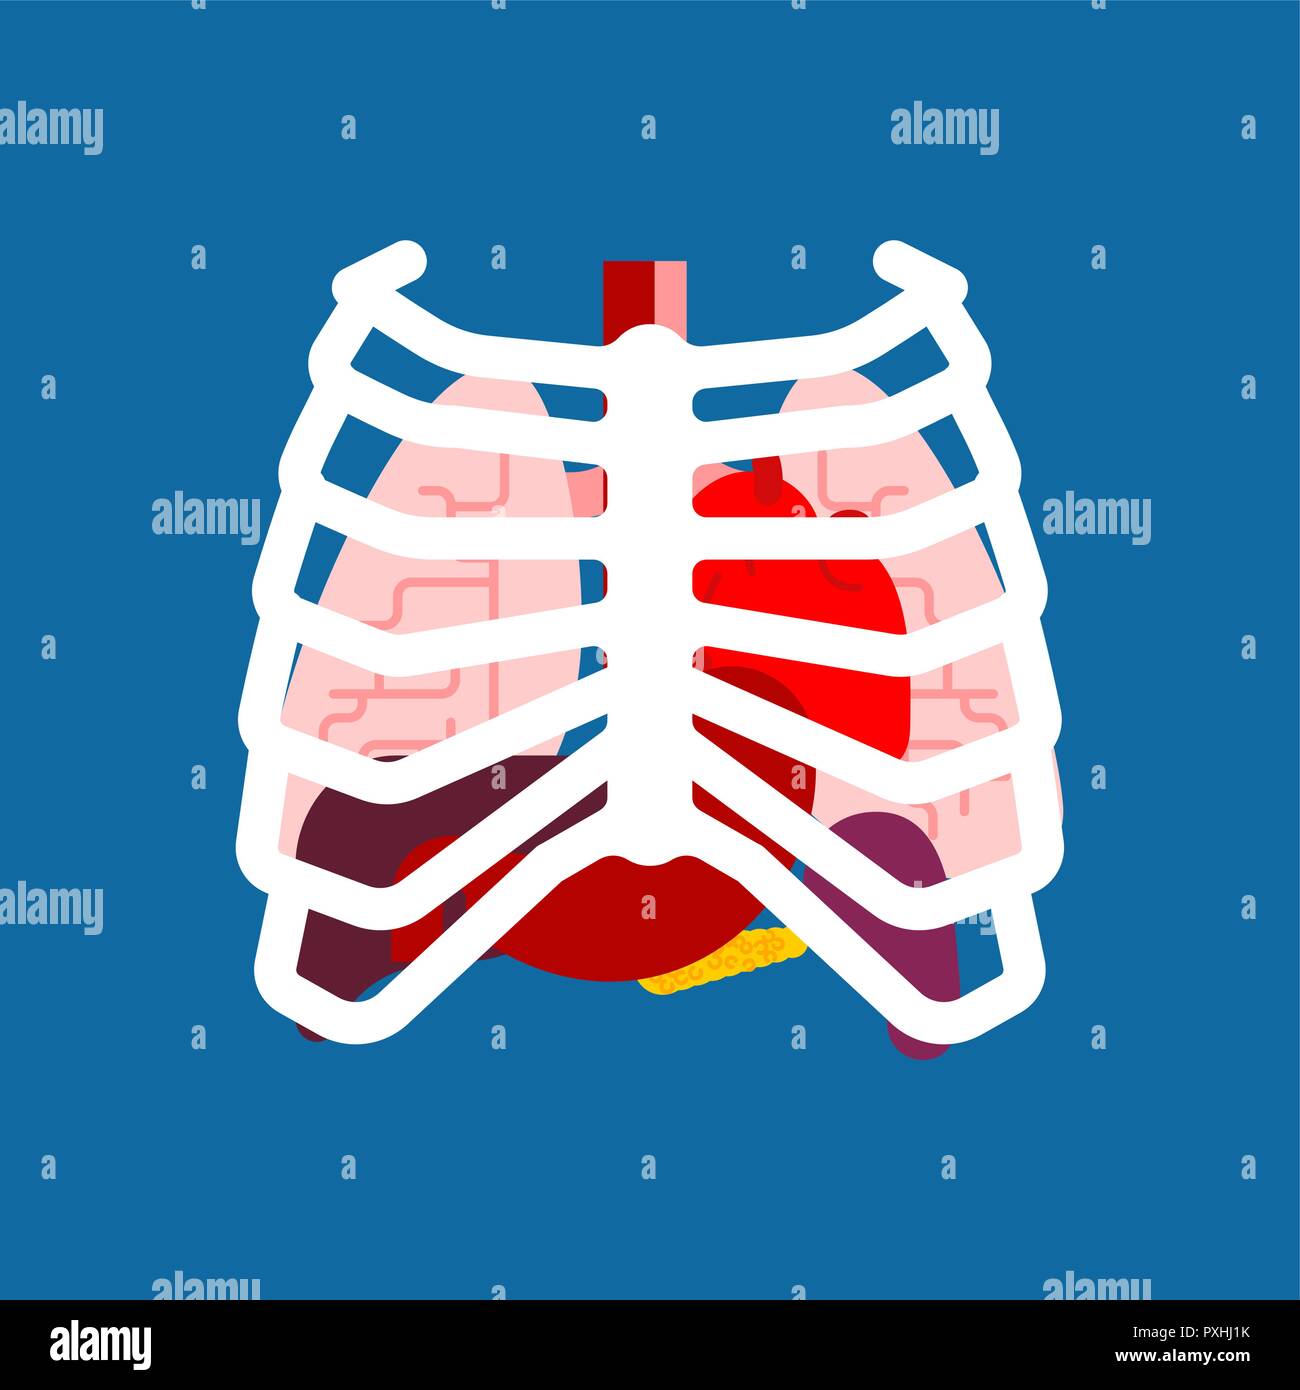 Rib Cage Heart Lungs High Resolution Stock Photography And Images Alamy